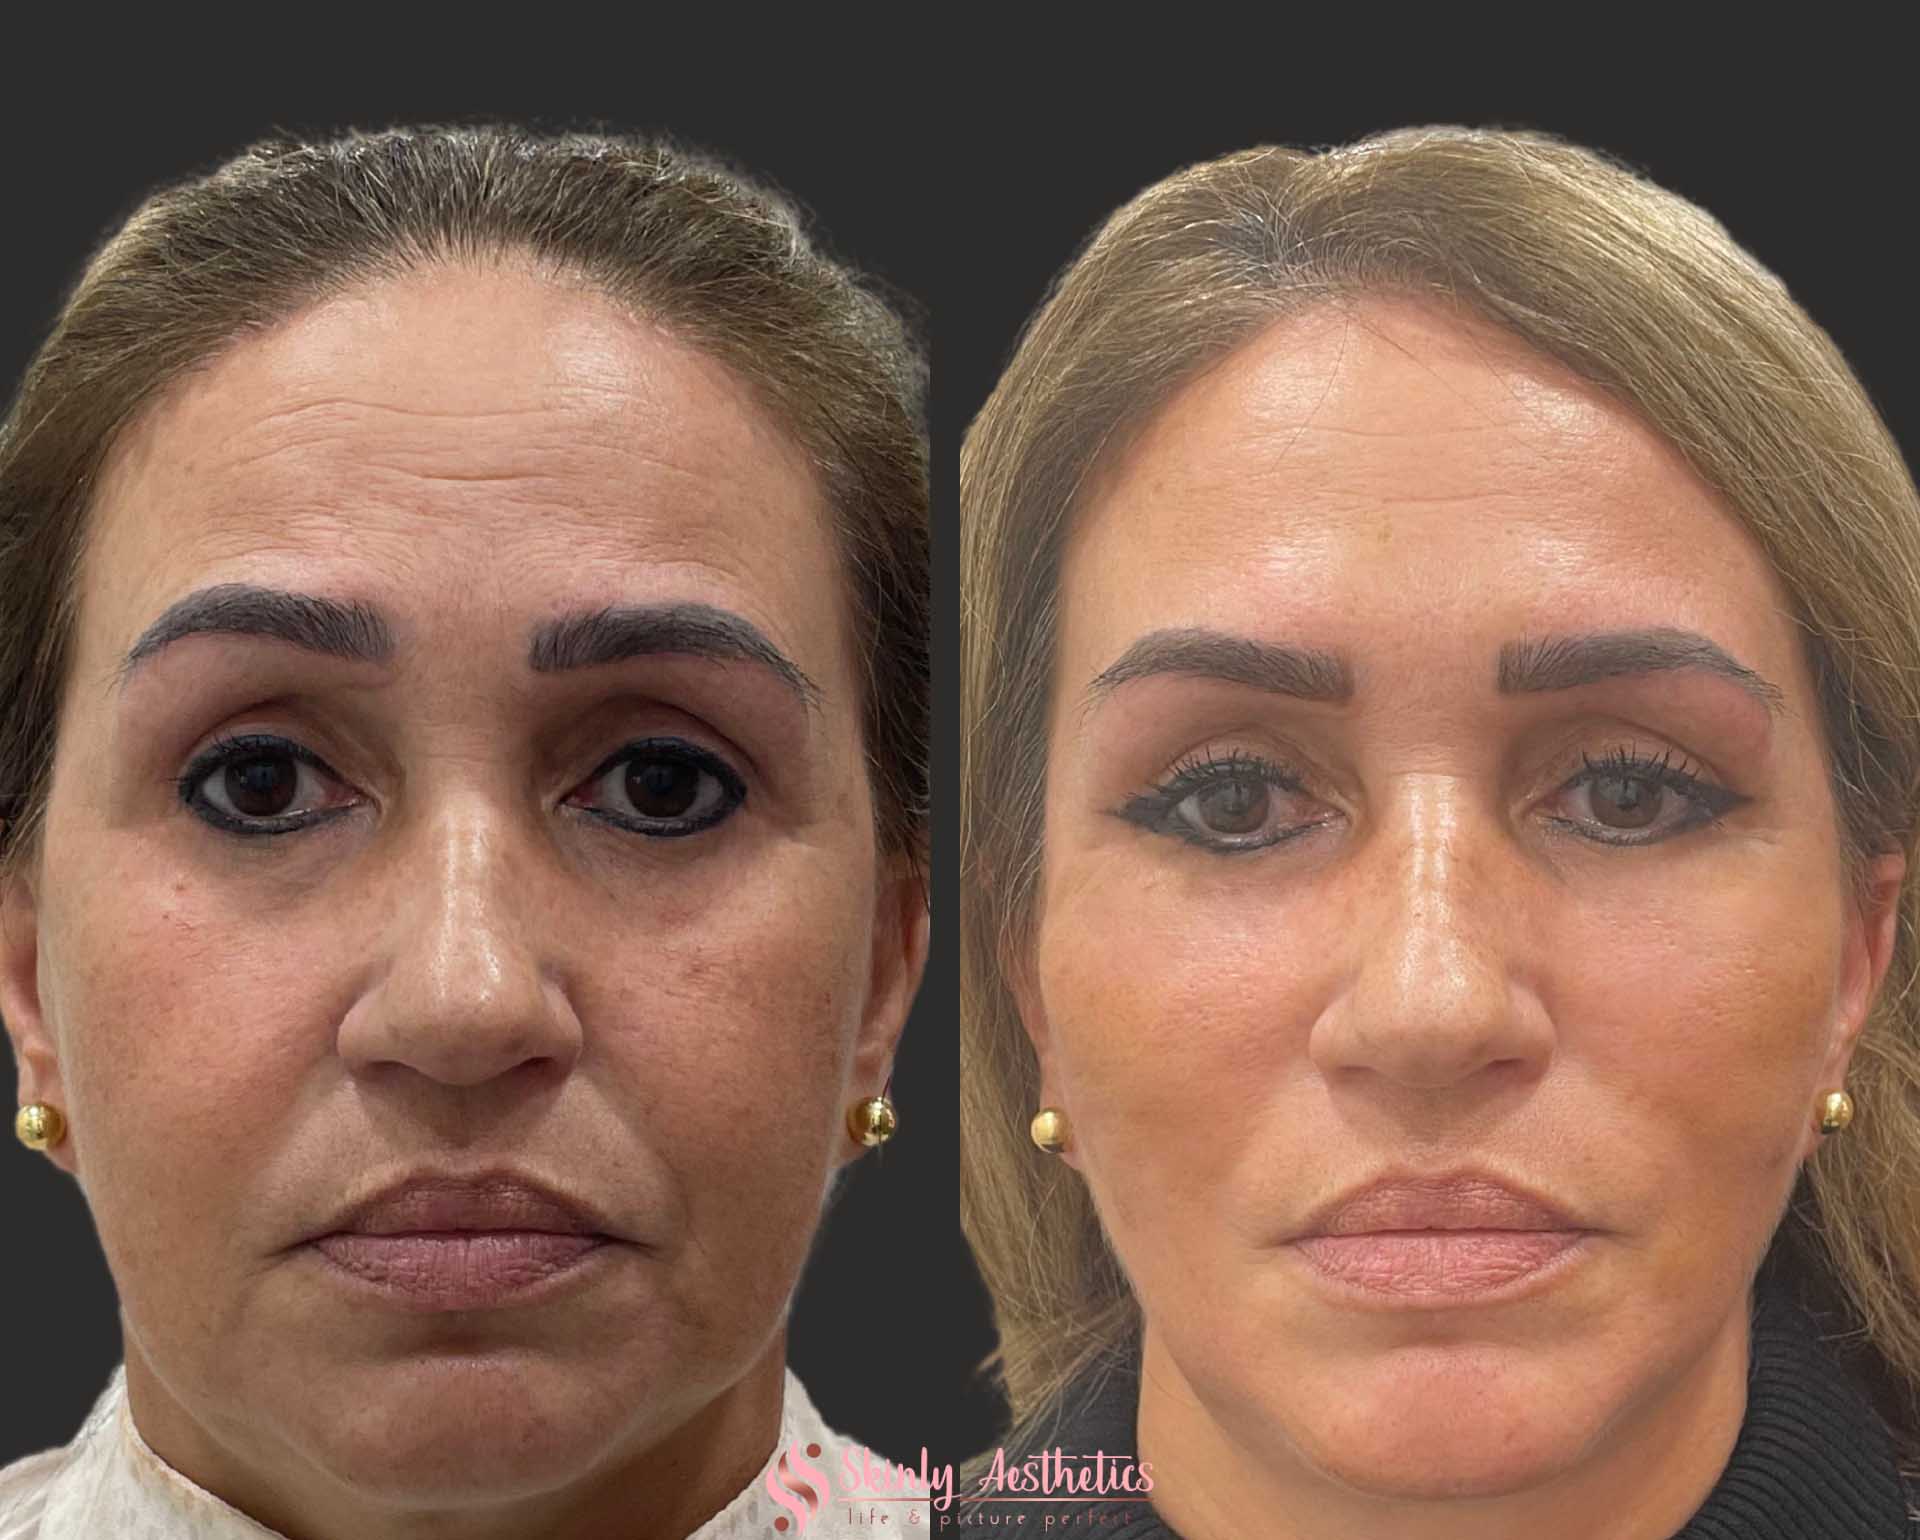 before and after results following V-shaped facelift with PDO threads